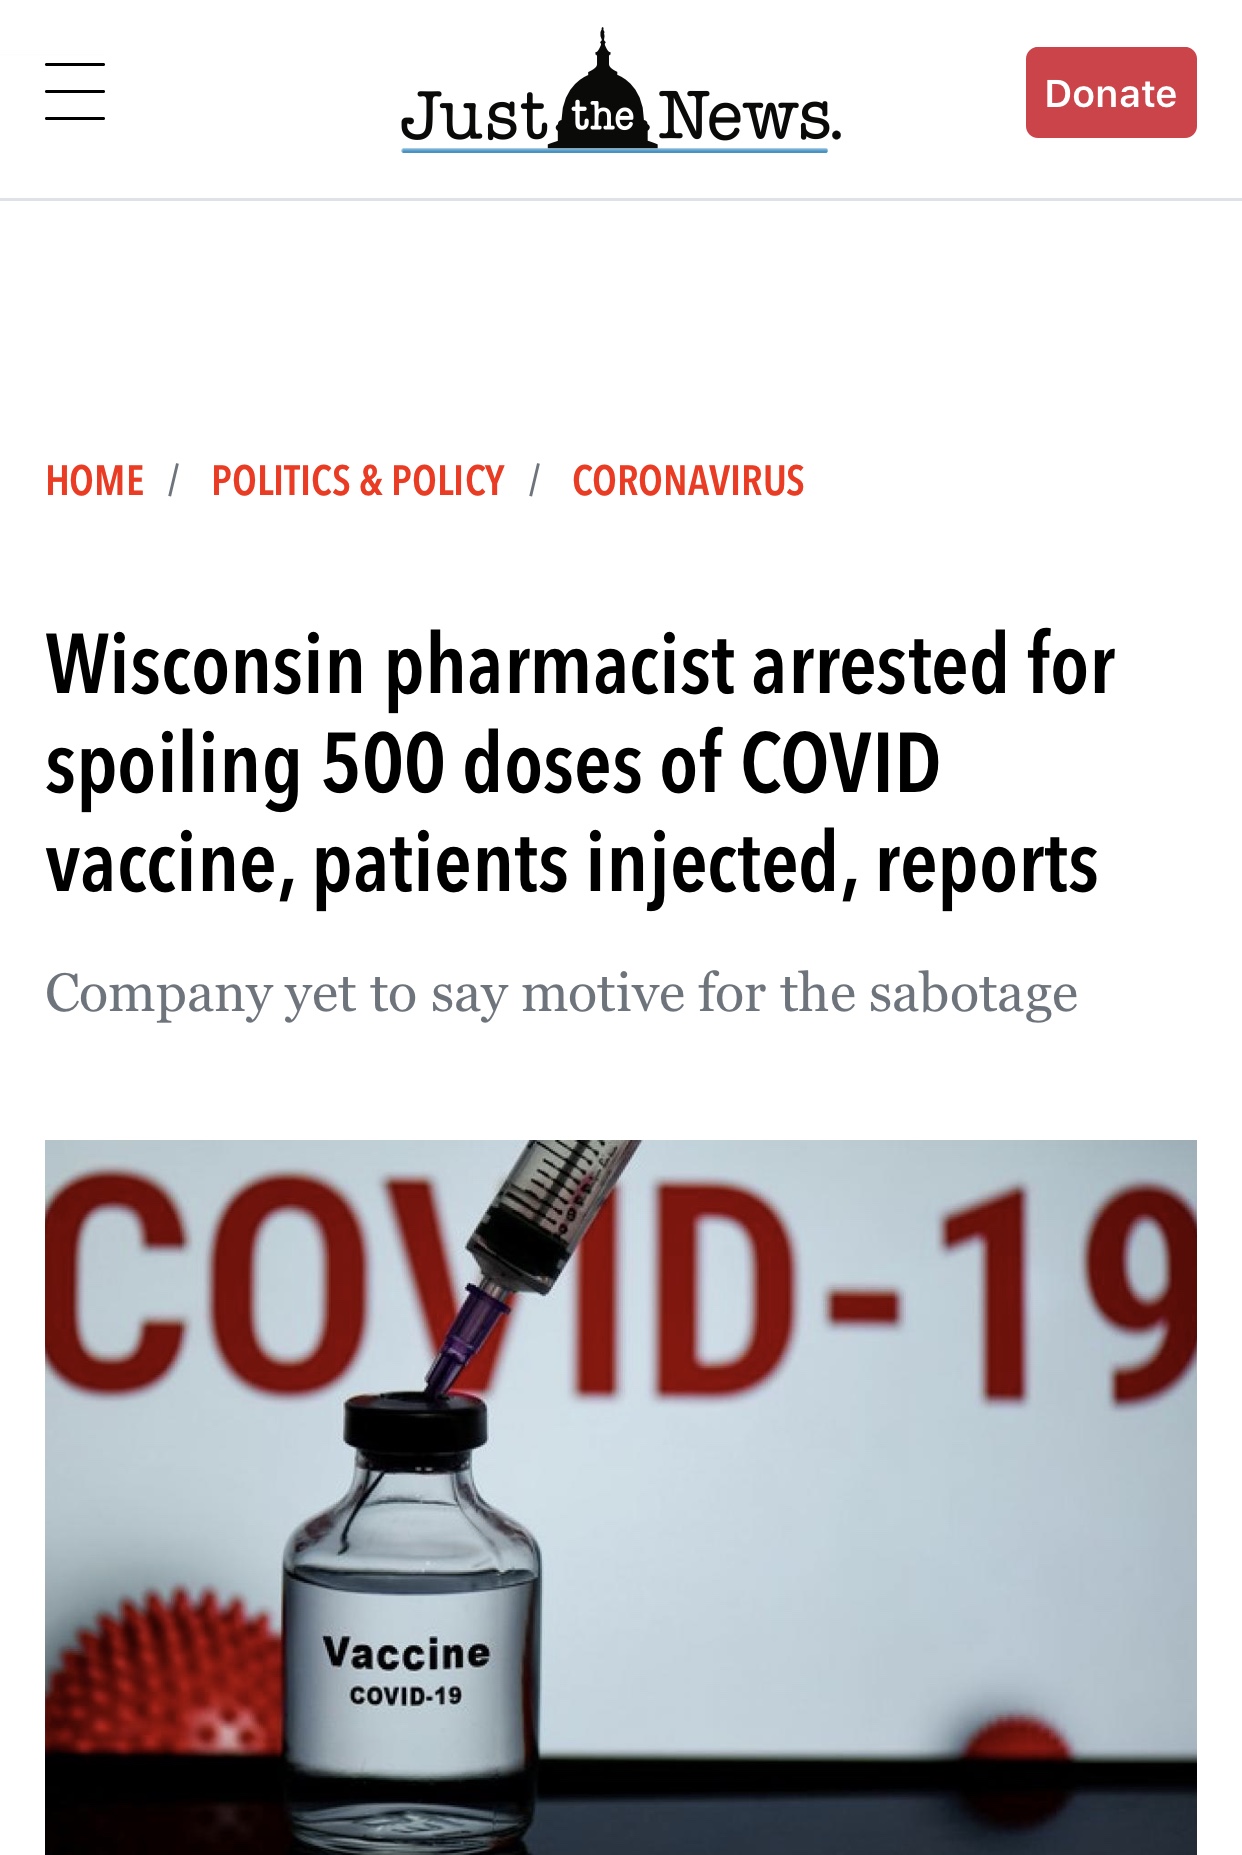 Wisconsin Pharmacist Arrested for Spoiling 500 Doses of COVID Vaccine, Patients Injected, Reports